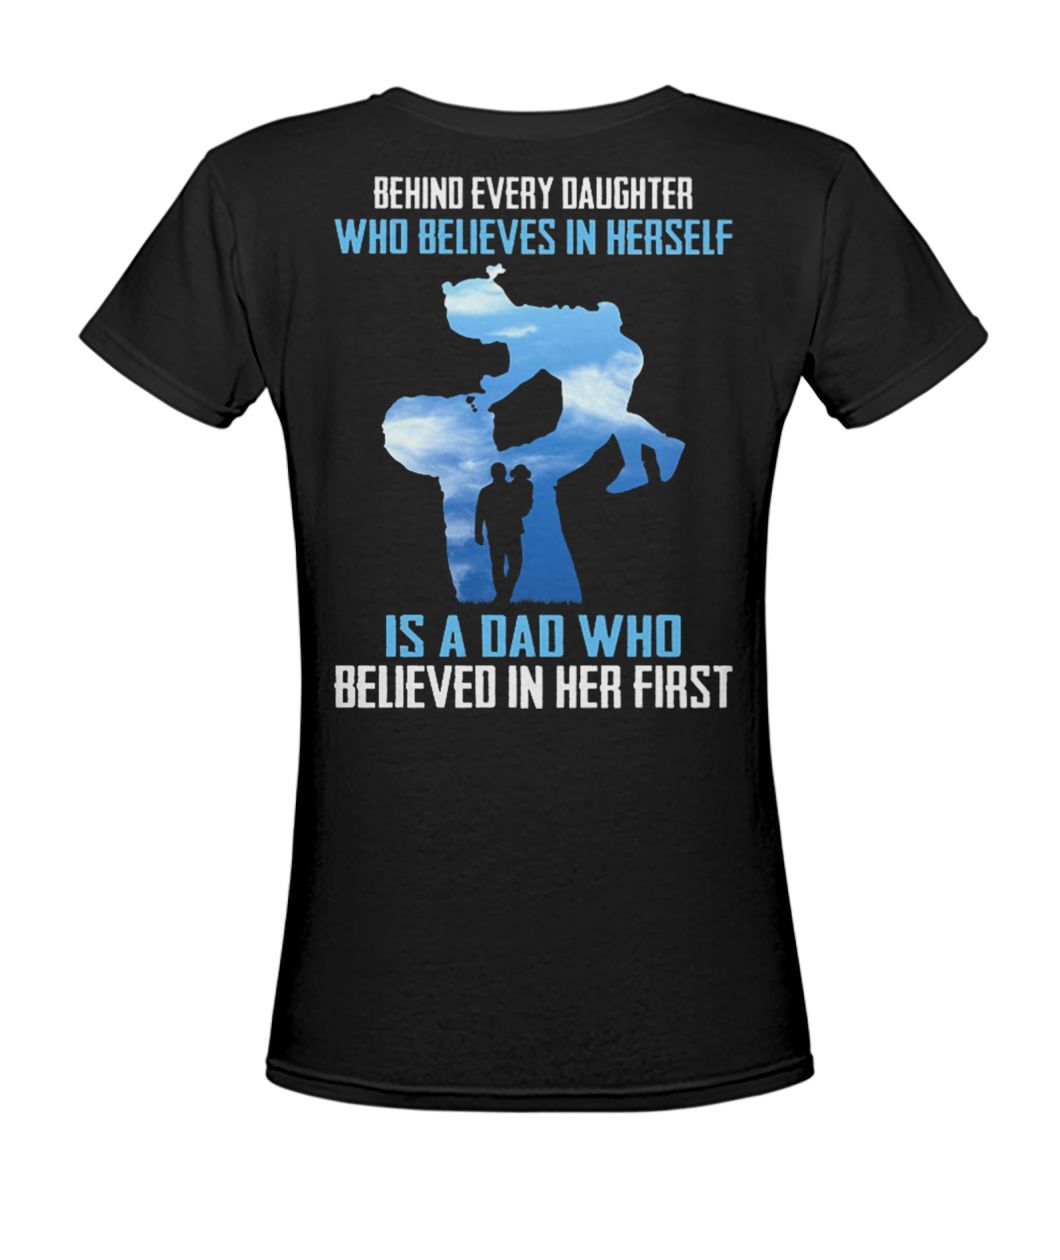 Behind every daughter who believes in herself is a dad who believed in her first women's v-neck